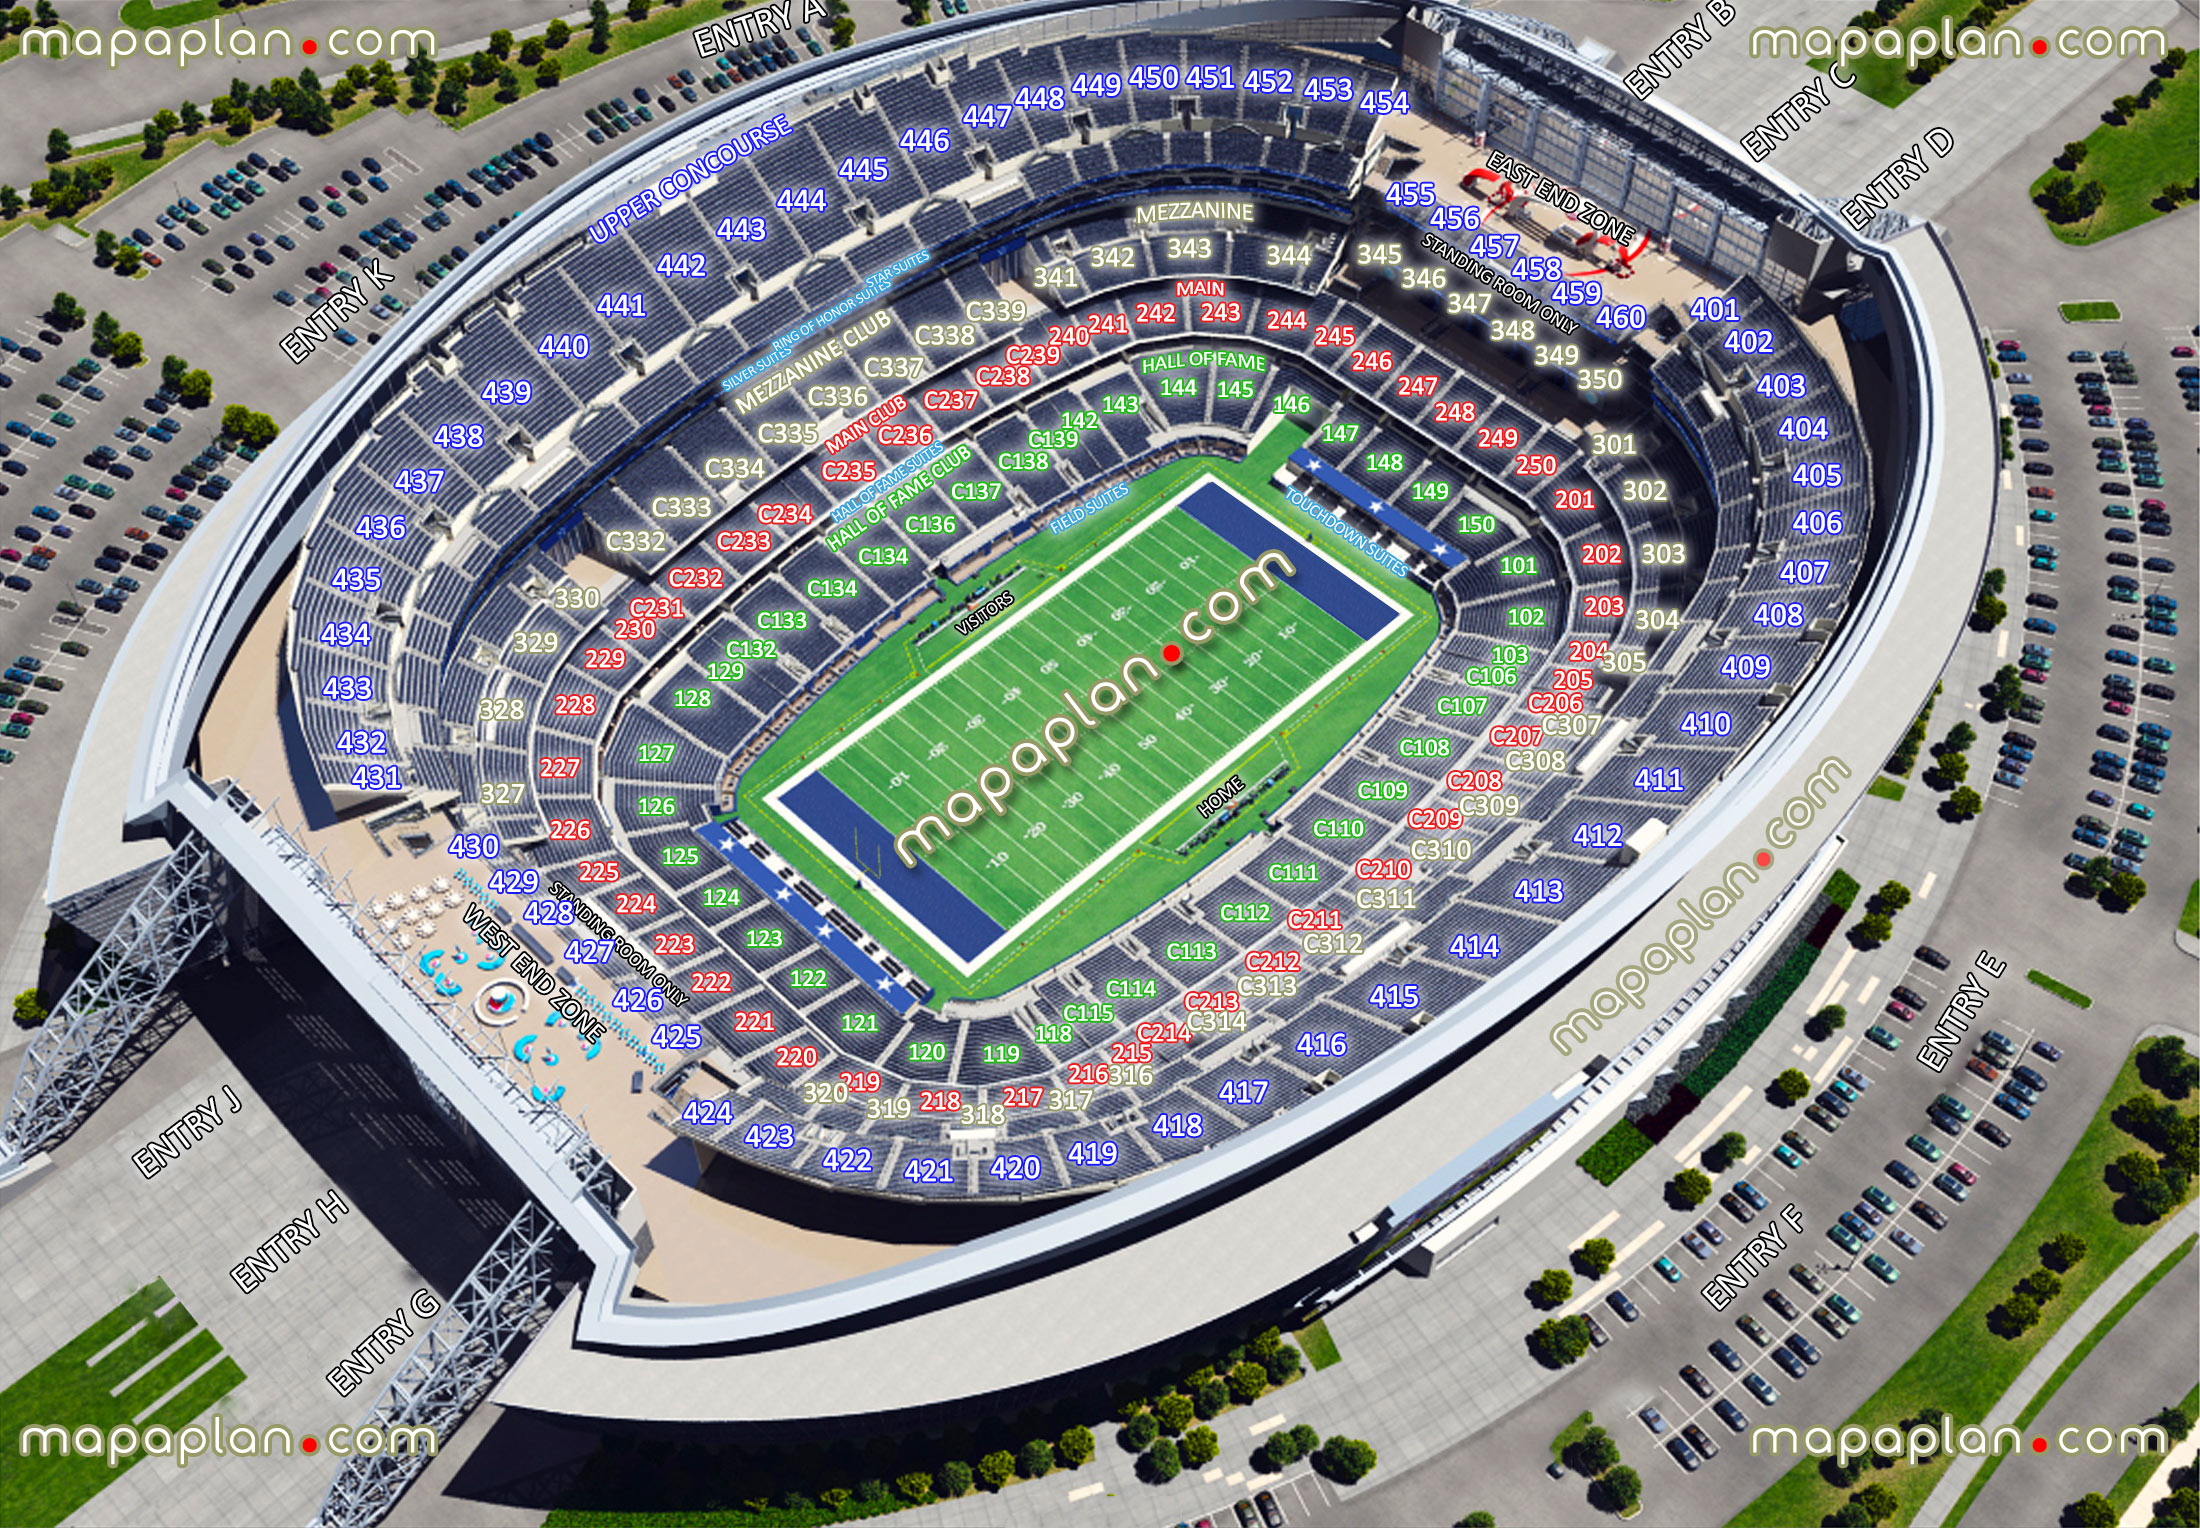 football seating chart virtual view dallas cowboys 3d interior arrangement interactive viewer photo review inside capacity guide hall fame main mezzanine upper concourse sections suites map including touchdown field silver ring honor star levels Dallas Cowboys ATT Stadium seating chart